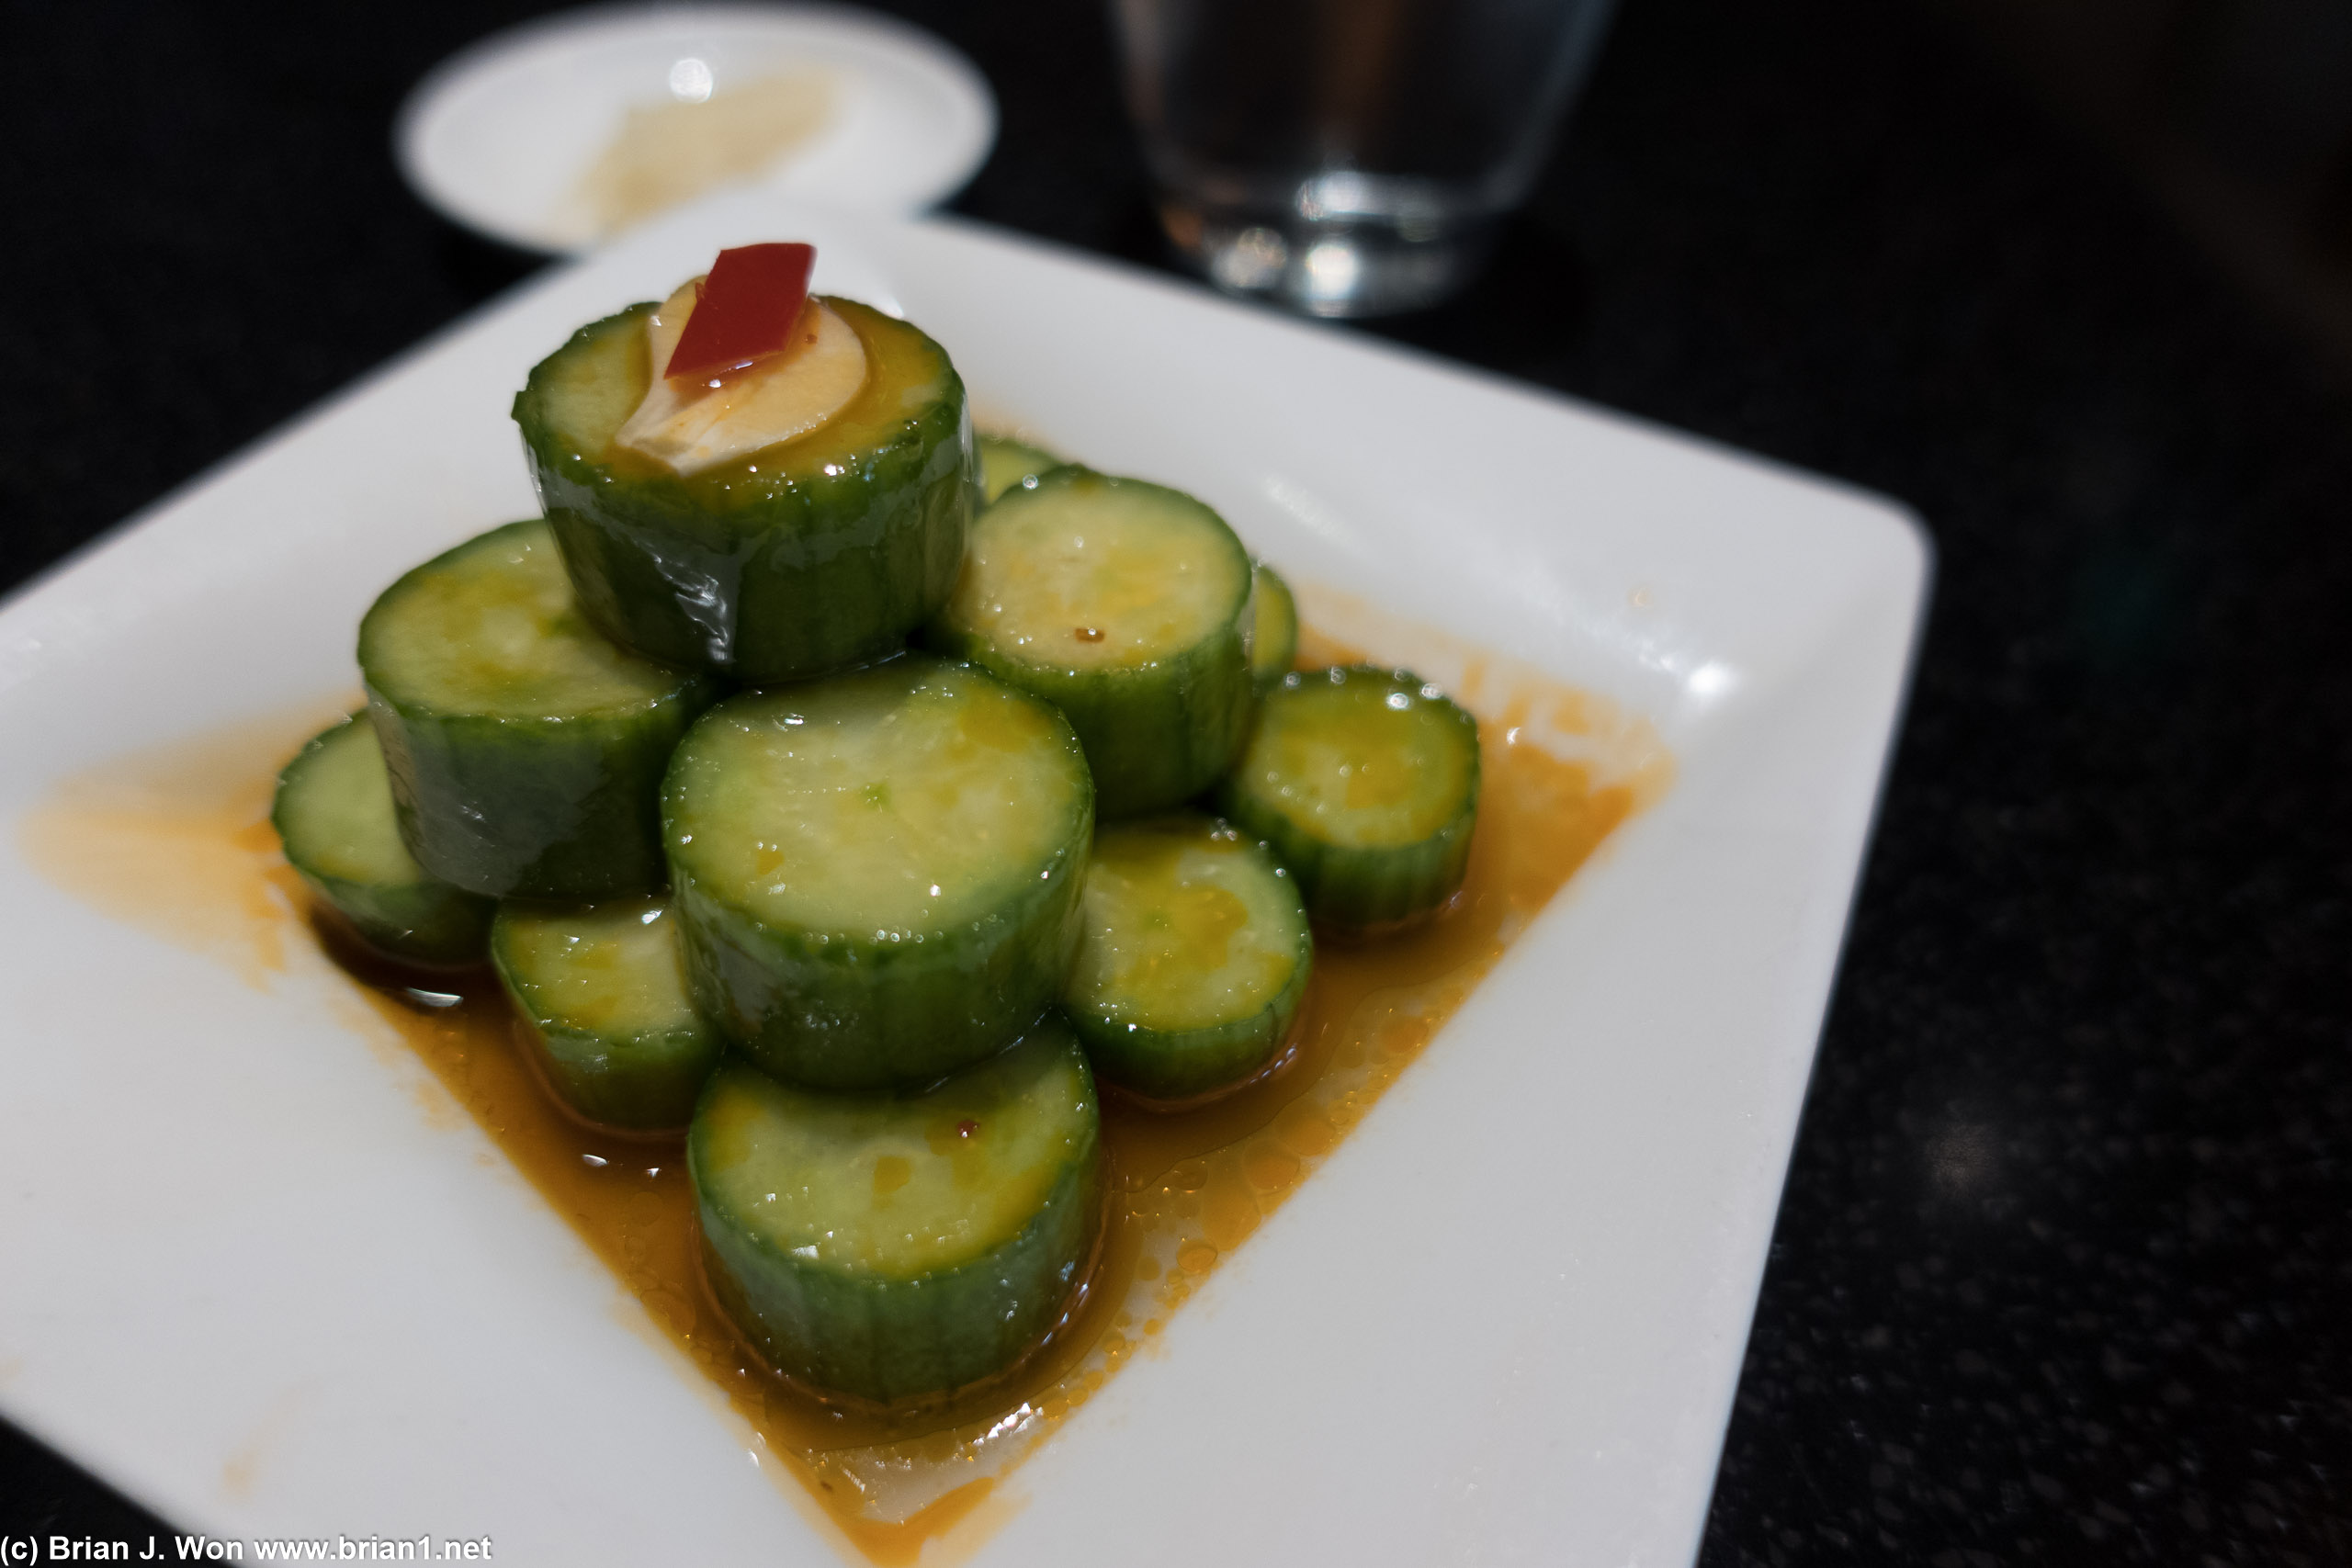 Din Tai Fung's spicy cold cucumber are always delicious.